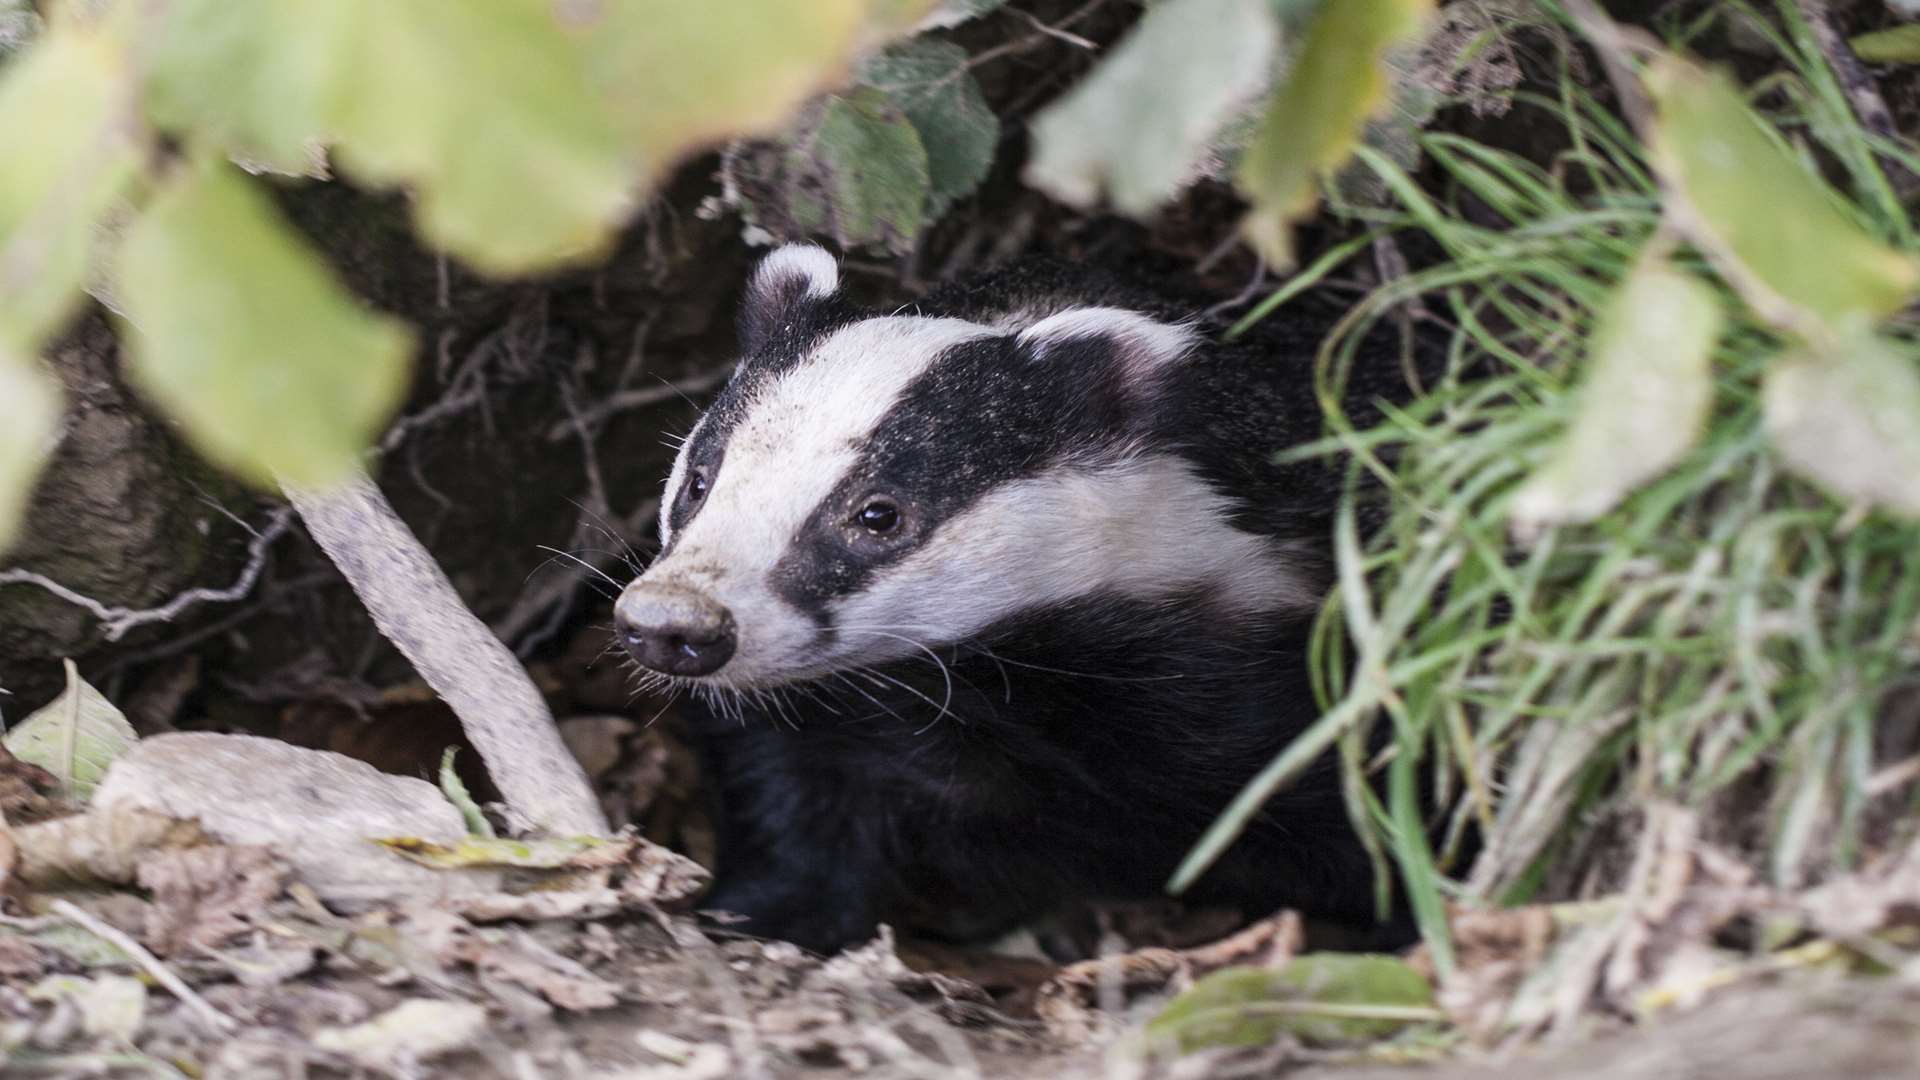 Badgers unearthed what was initially thought to be a human bone